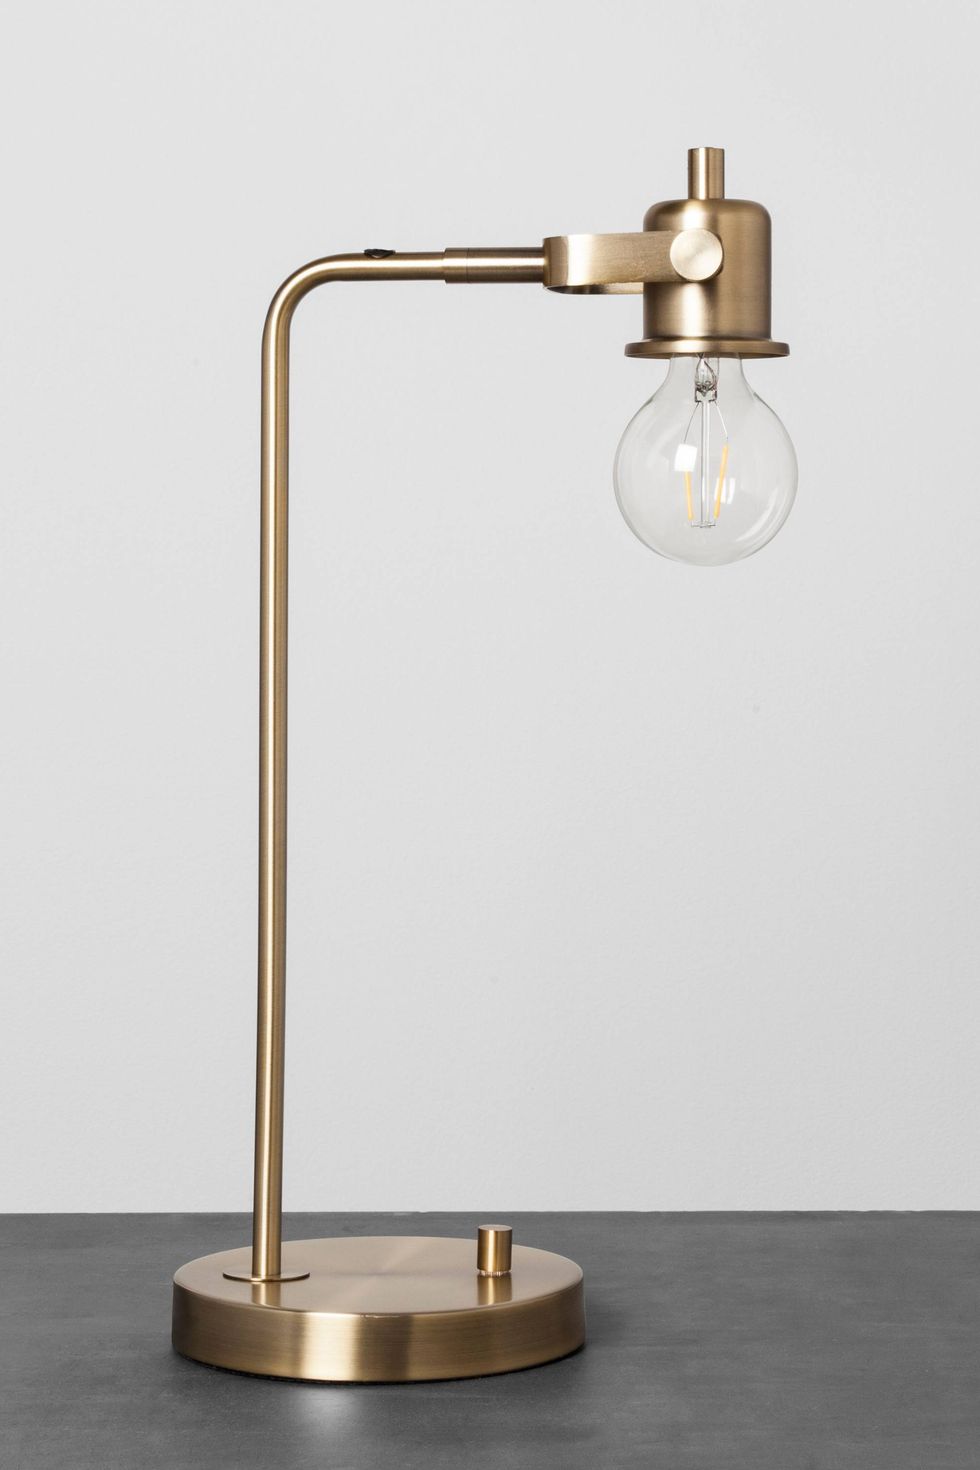 Lamp, Light fixture, Lighting, Brass, Table, Material property, Metal, Lighting accessory, Lampshade, Furniture, 